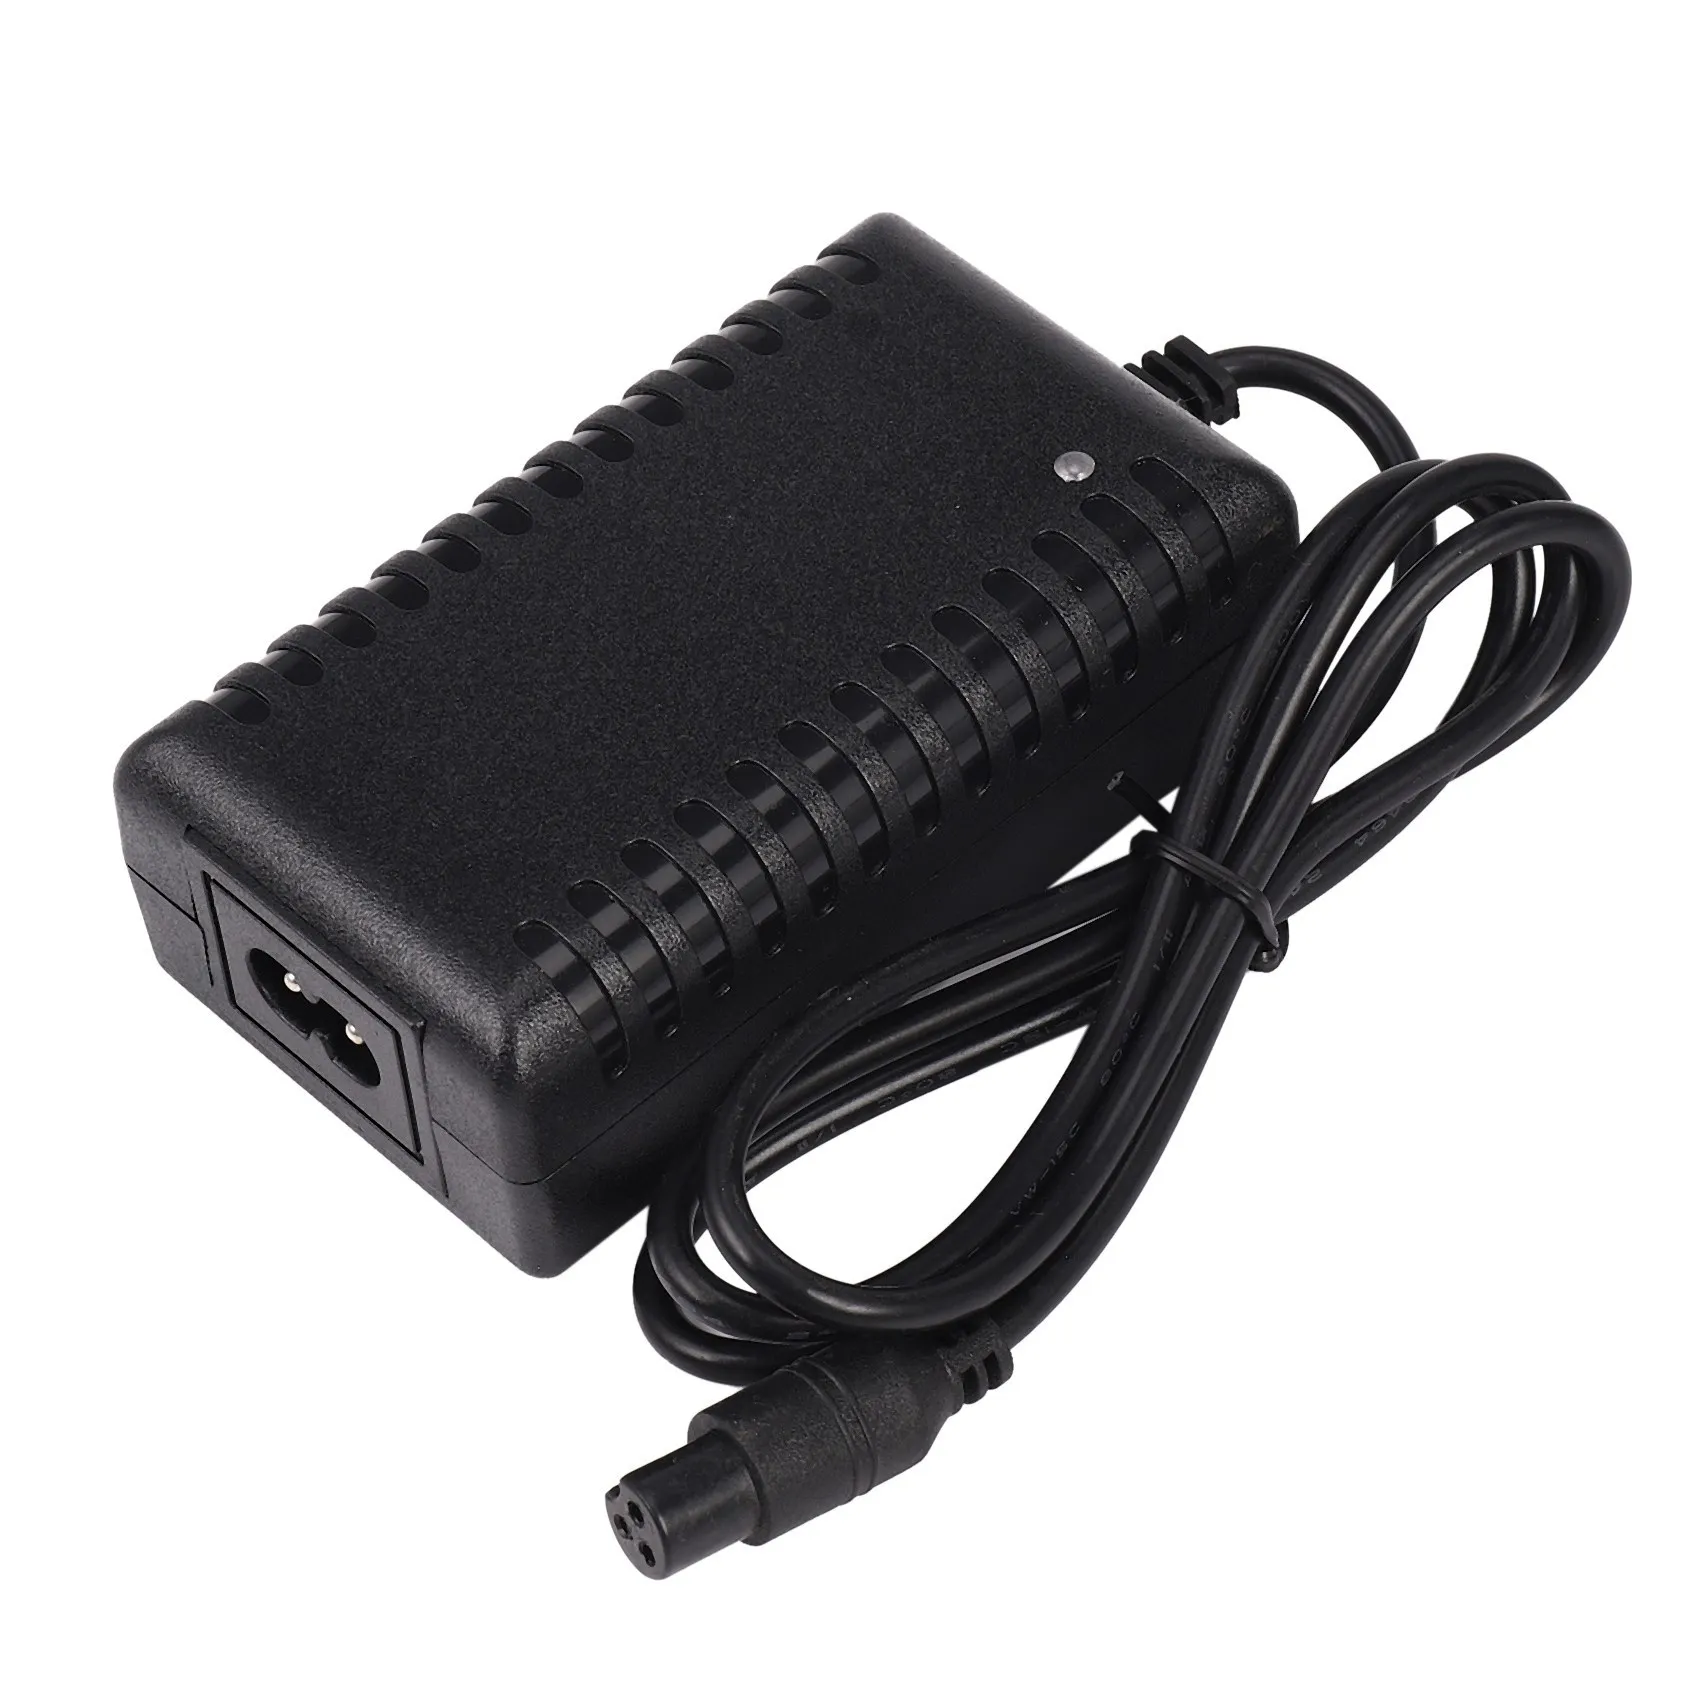 

42V 2A Drive Traction Balance Intelligent Auto Wheel Balancing Scooter Hover Border Power Battery Charger(Eu Plug)